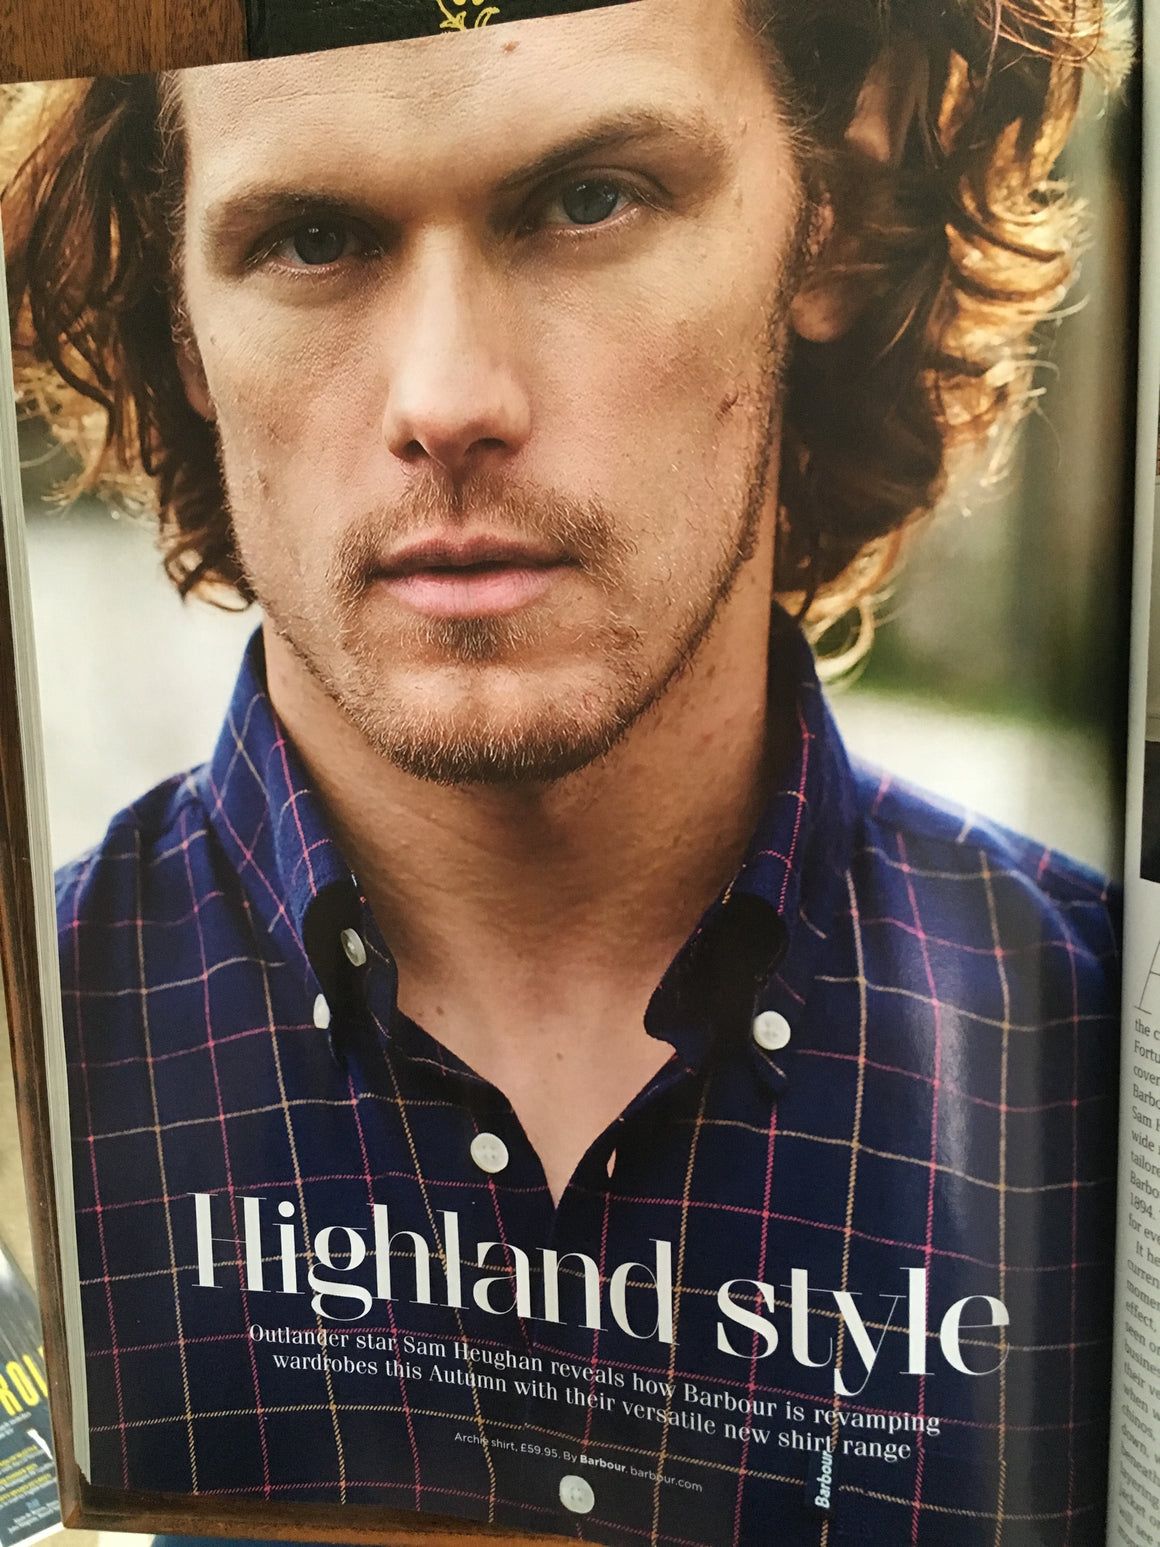 Sam Heughan photo shoot for Barbour 